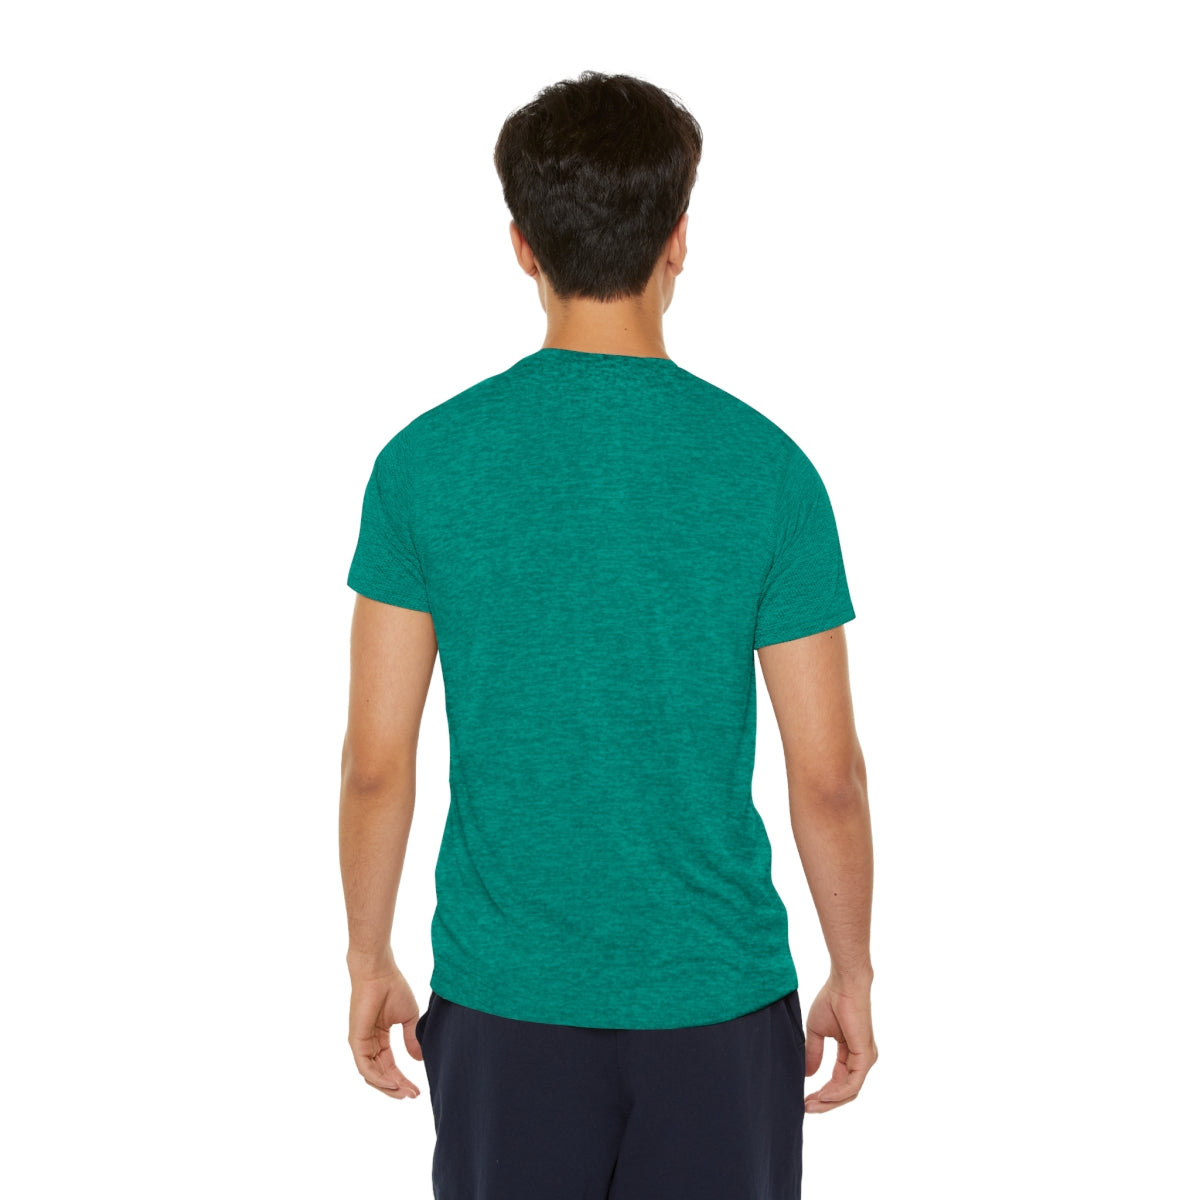 Men's Yoga and Sports T-shirt - Eco Friendly - Personal Hour for Yoga and Meditations 